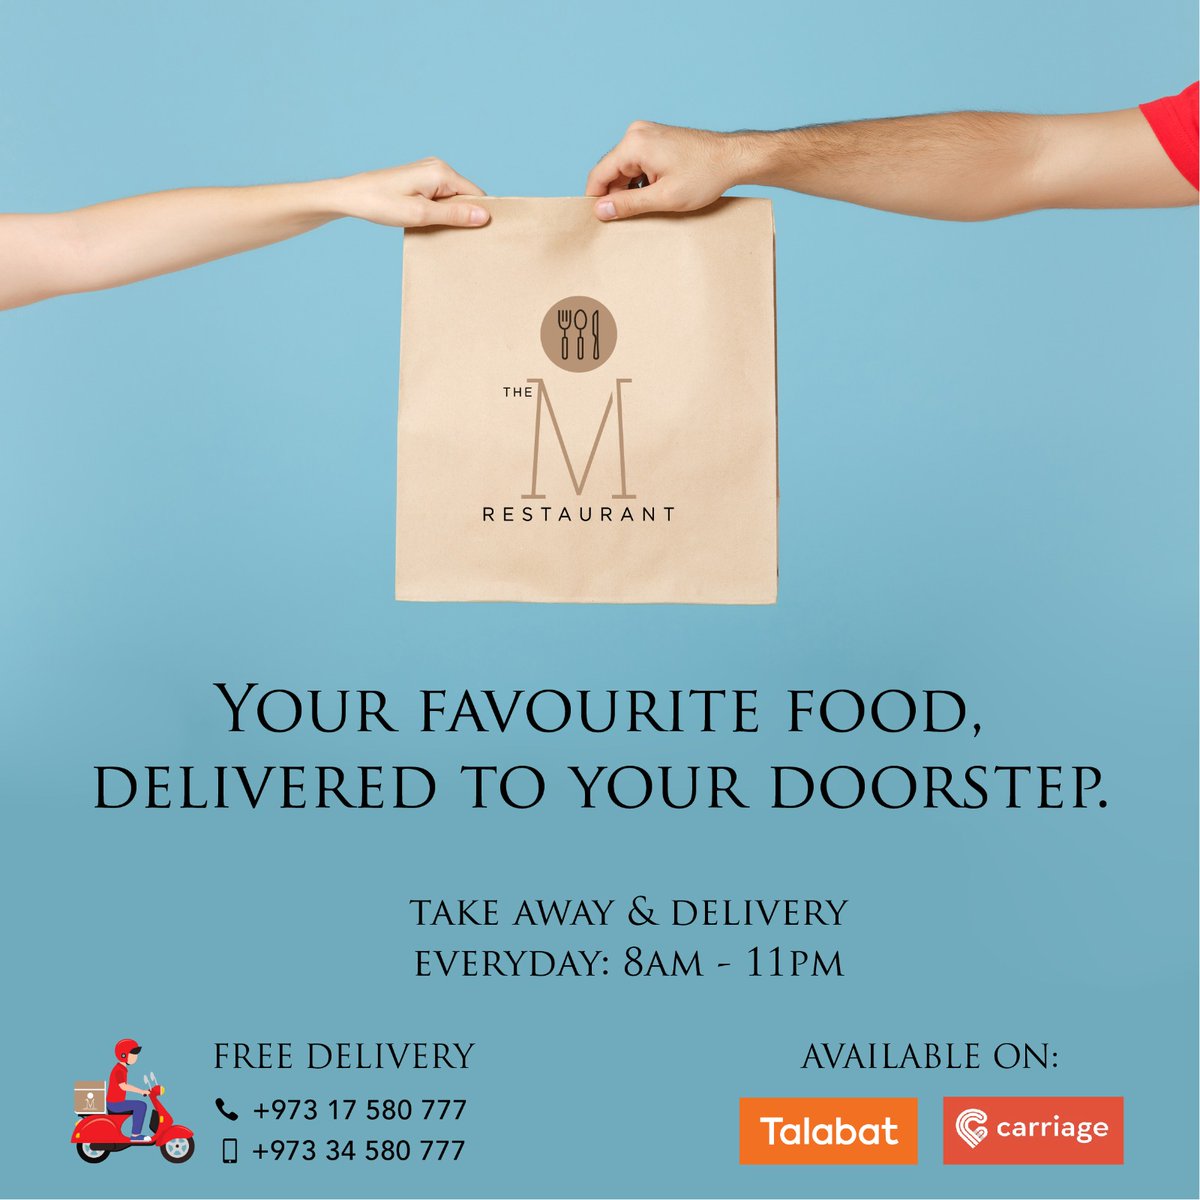 Enjoy from a multitude of multi-cuisine dishes at the comfort of your house!
#Stayhome & #ordernow on Talabat & Carriage
#orderonline #foodie #delivery #fooddelivery #takeout #homedelivery #services #multicuisinefood #deliverypartner #doorstepdelivery #restaurant #themrestaurant